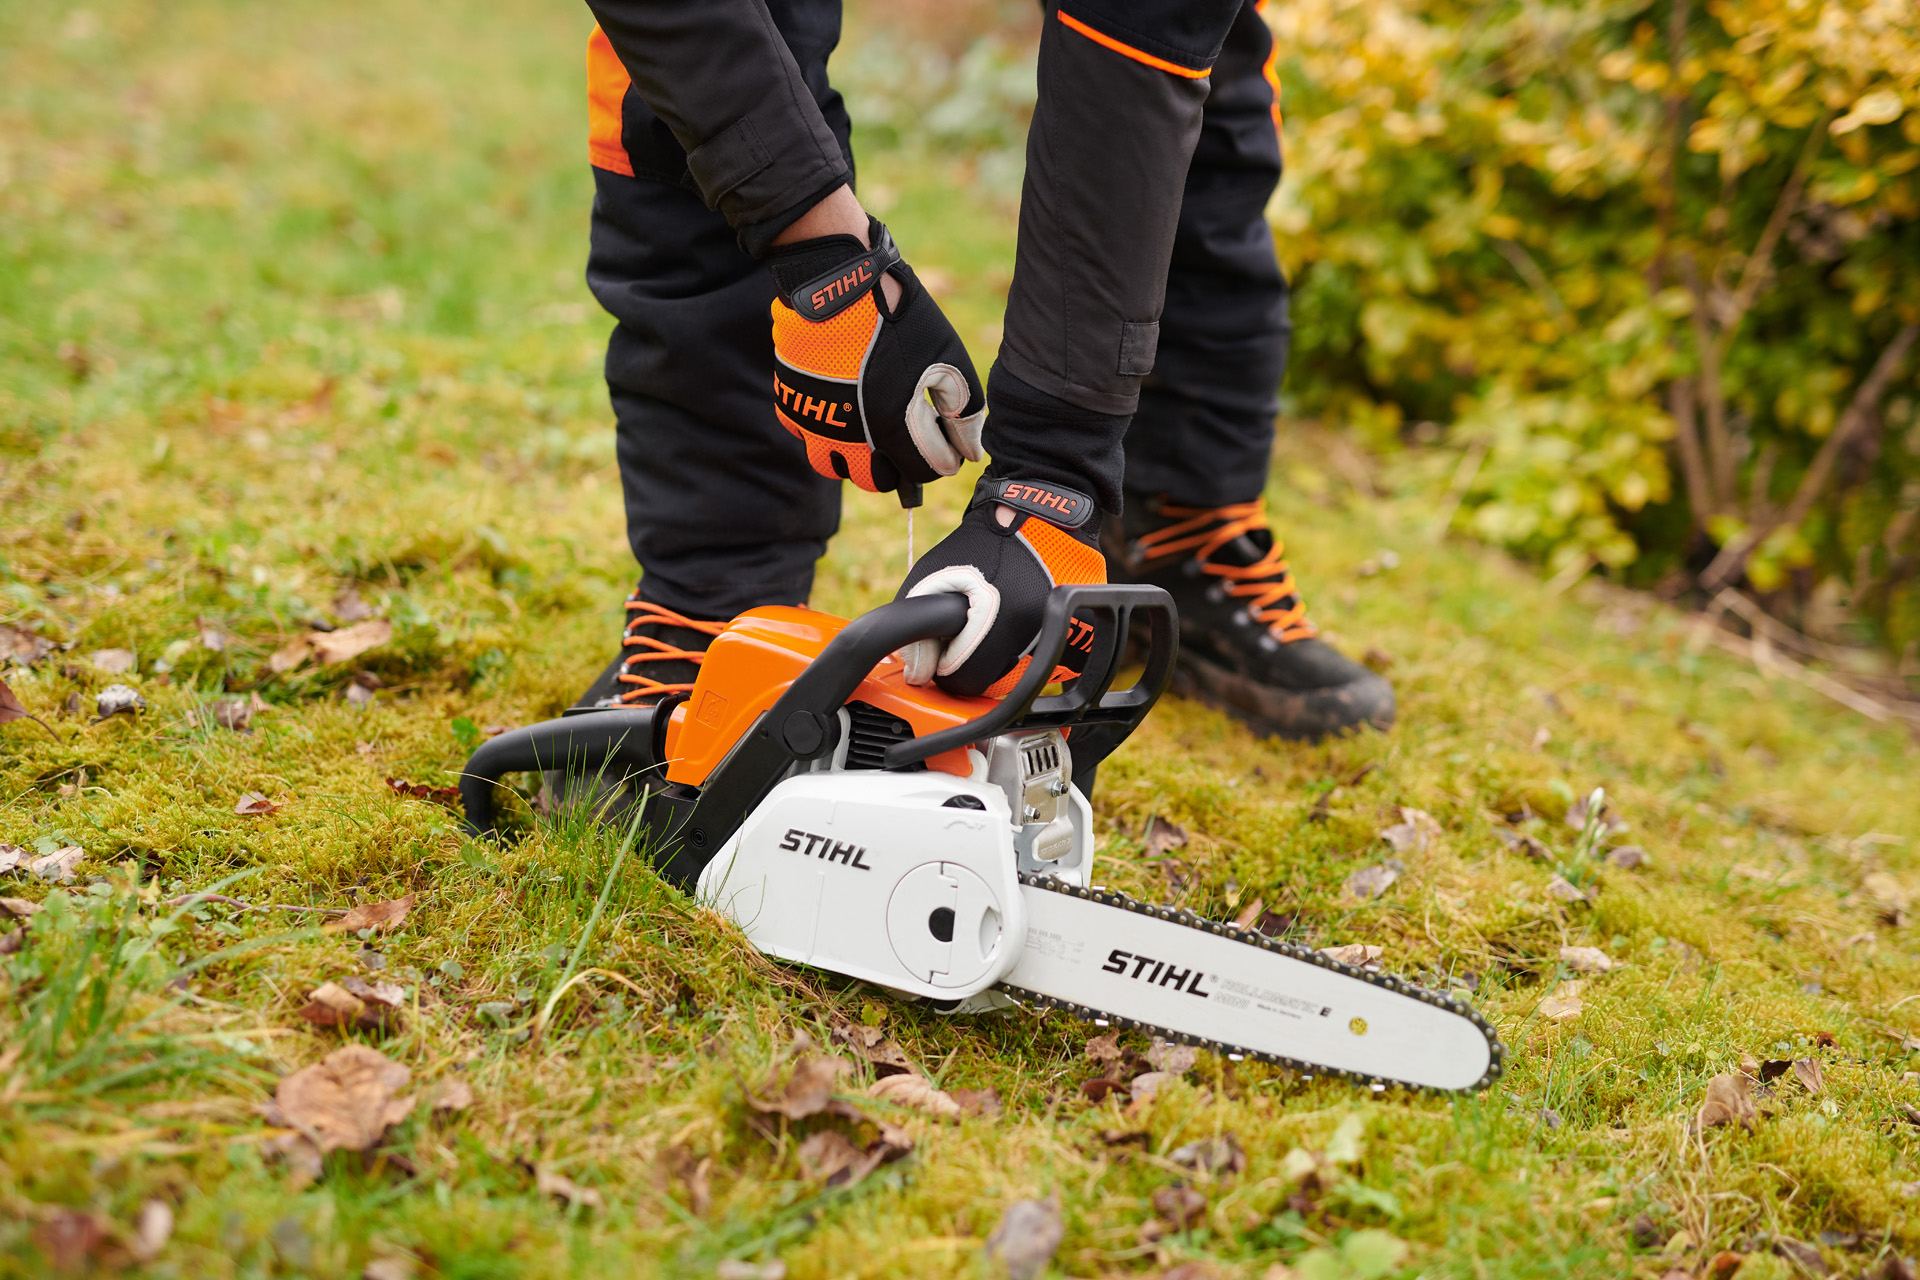 A STIHL MS 180 C-BE chainsaw on the ground, with a person wearing protective gloves holding the handle.